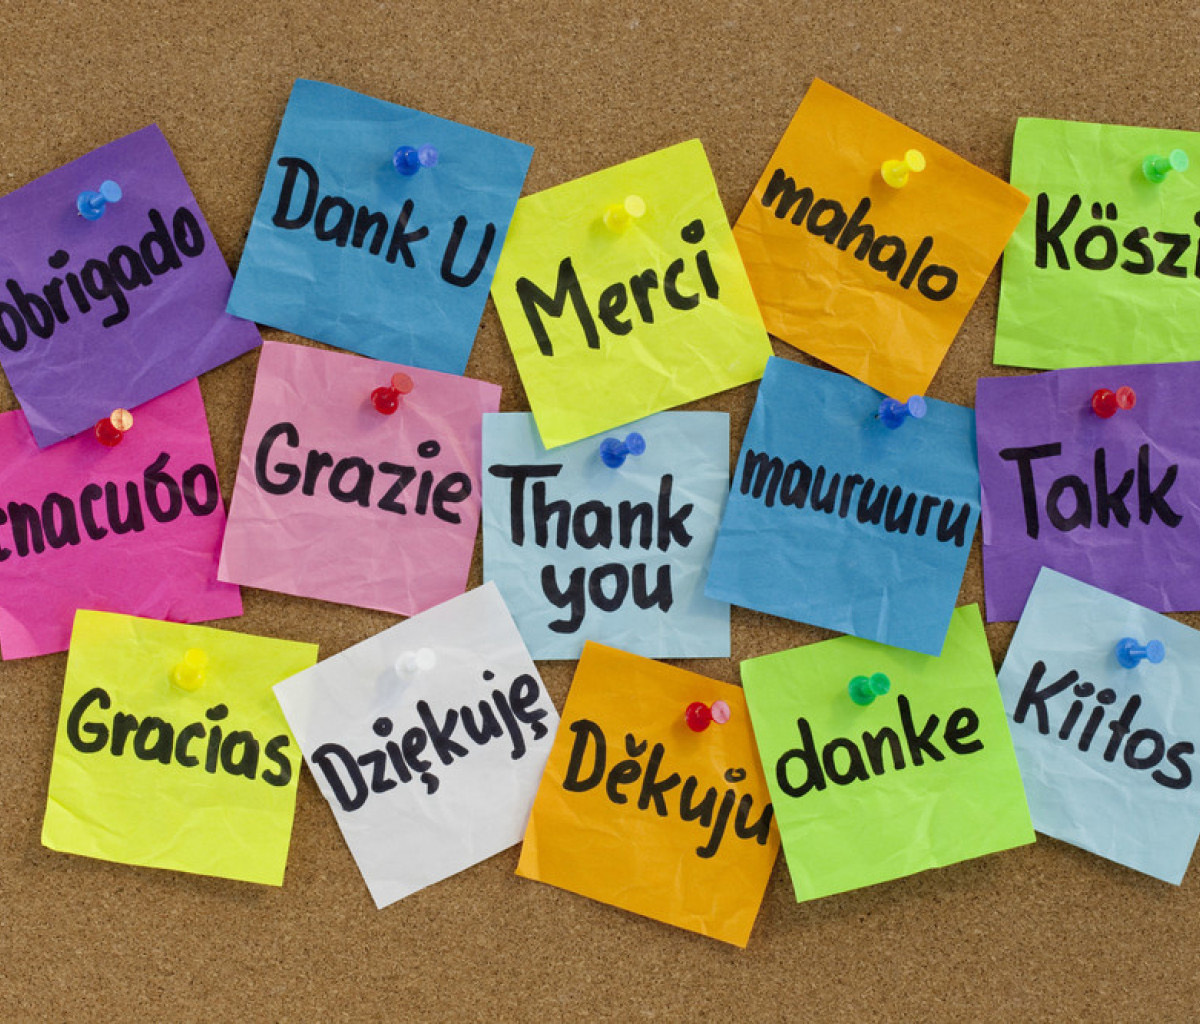 How To Say Thank You in Different Languages wallpaper 1200x1024